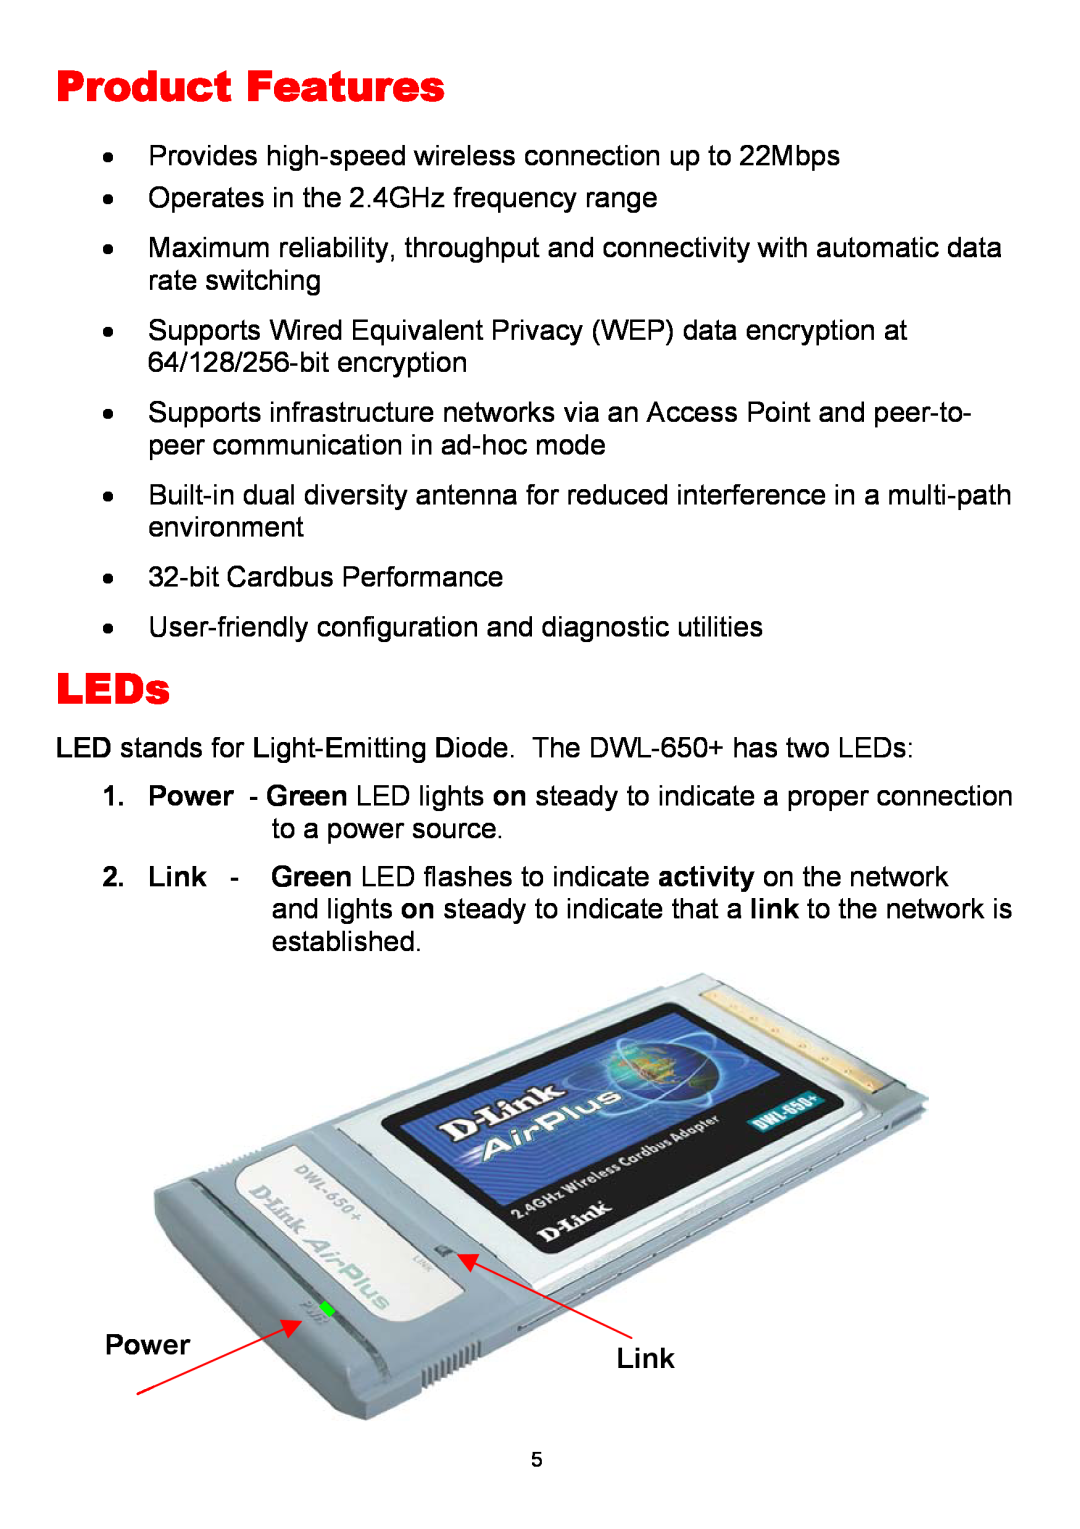 D-Link DWL-650+ manual Product Features, LEDs, Power, Link 